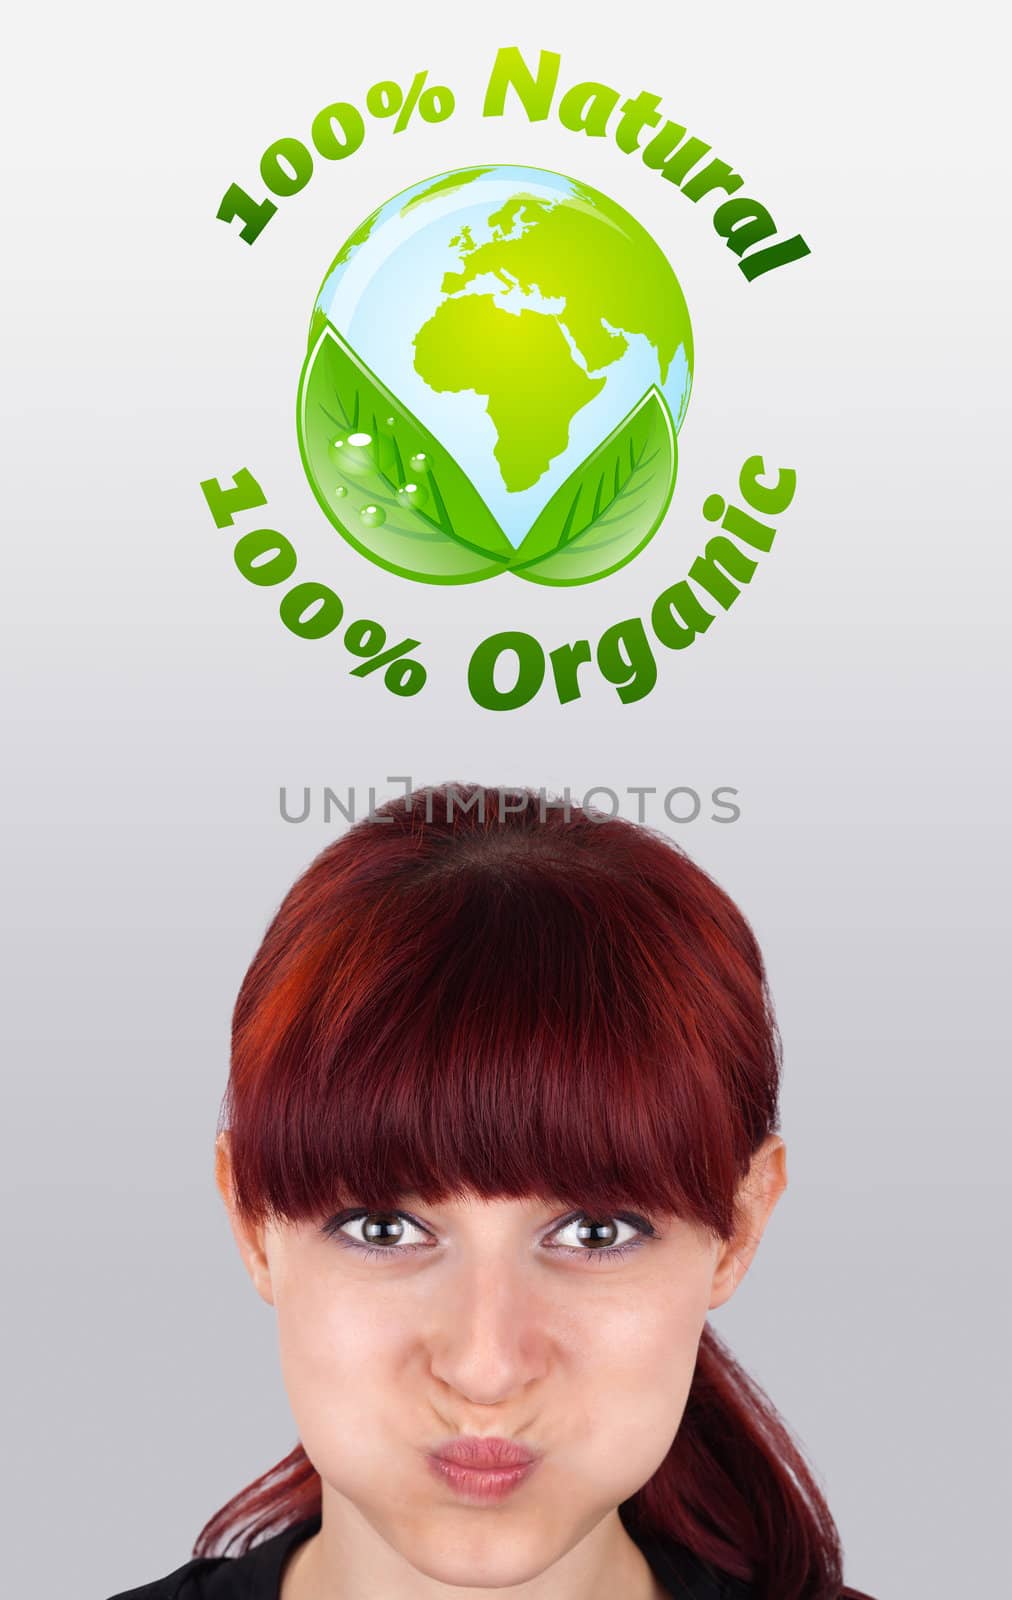 Young girl head looking at green eco sign